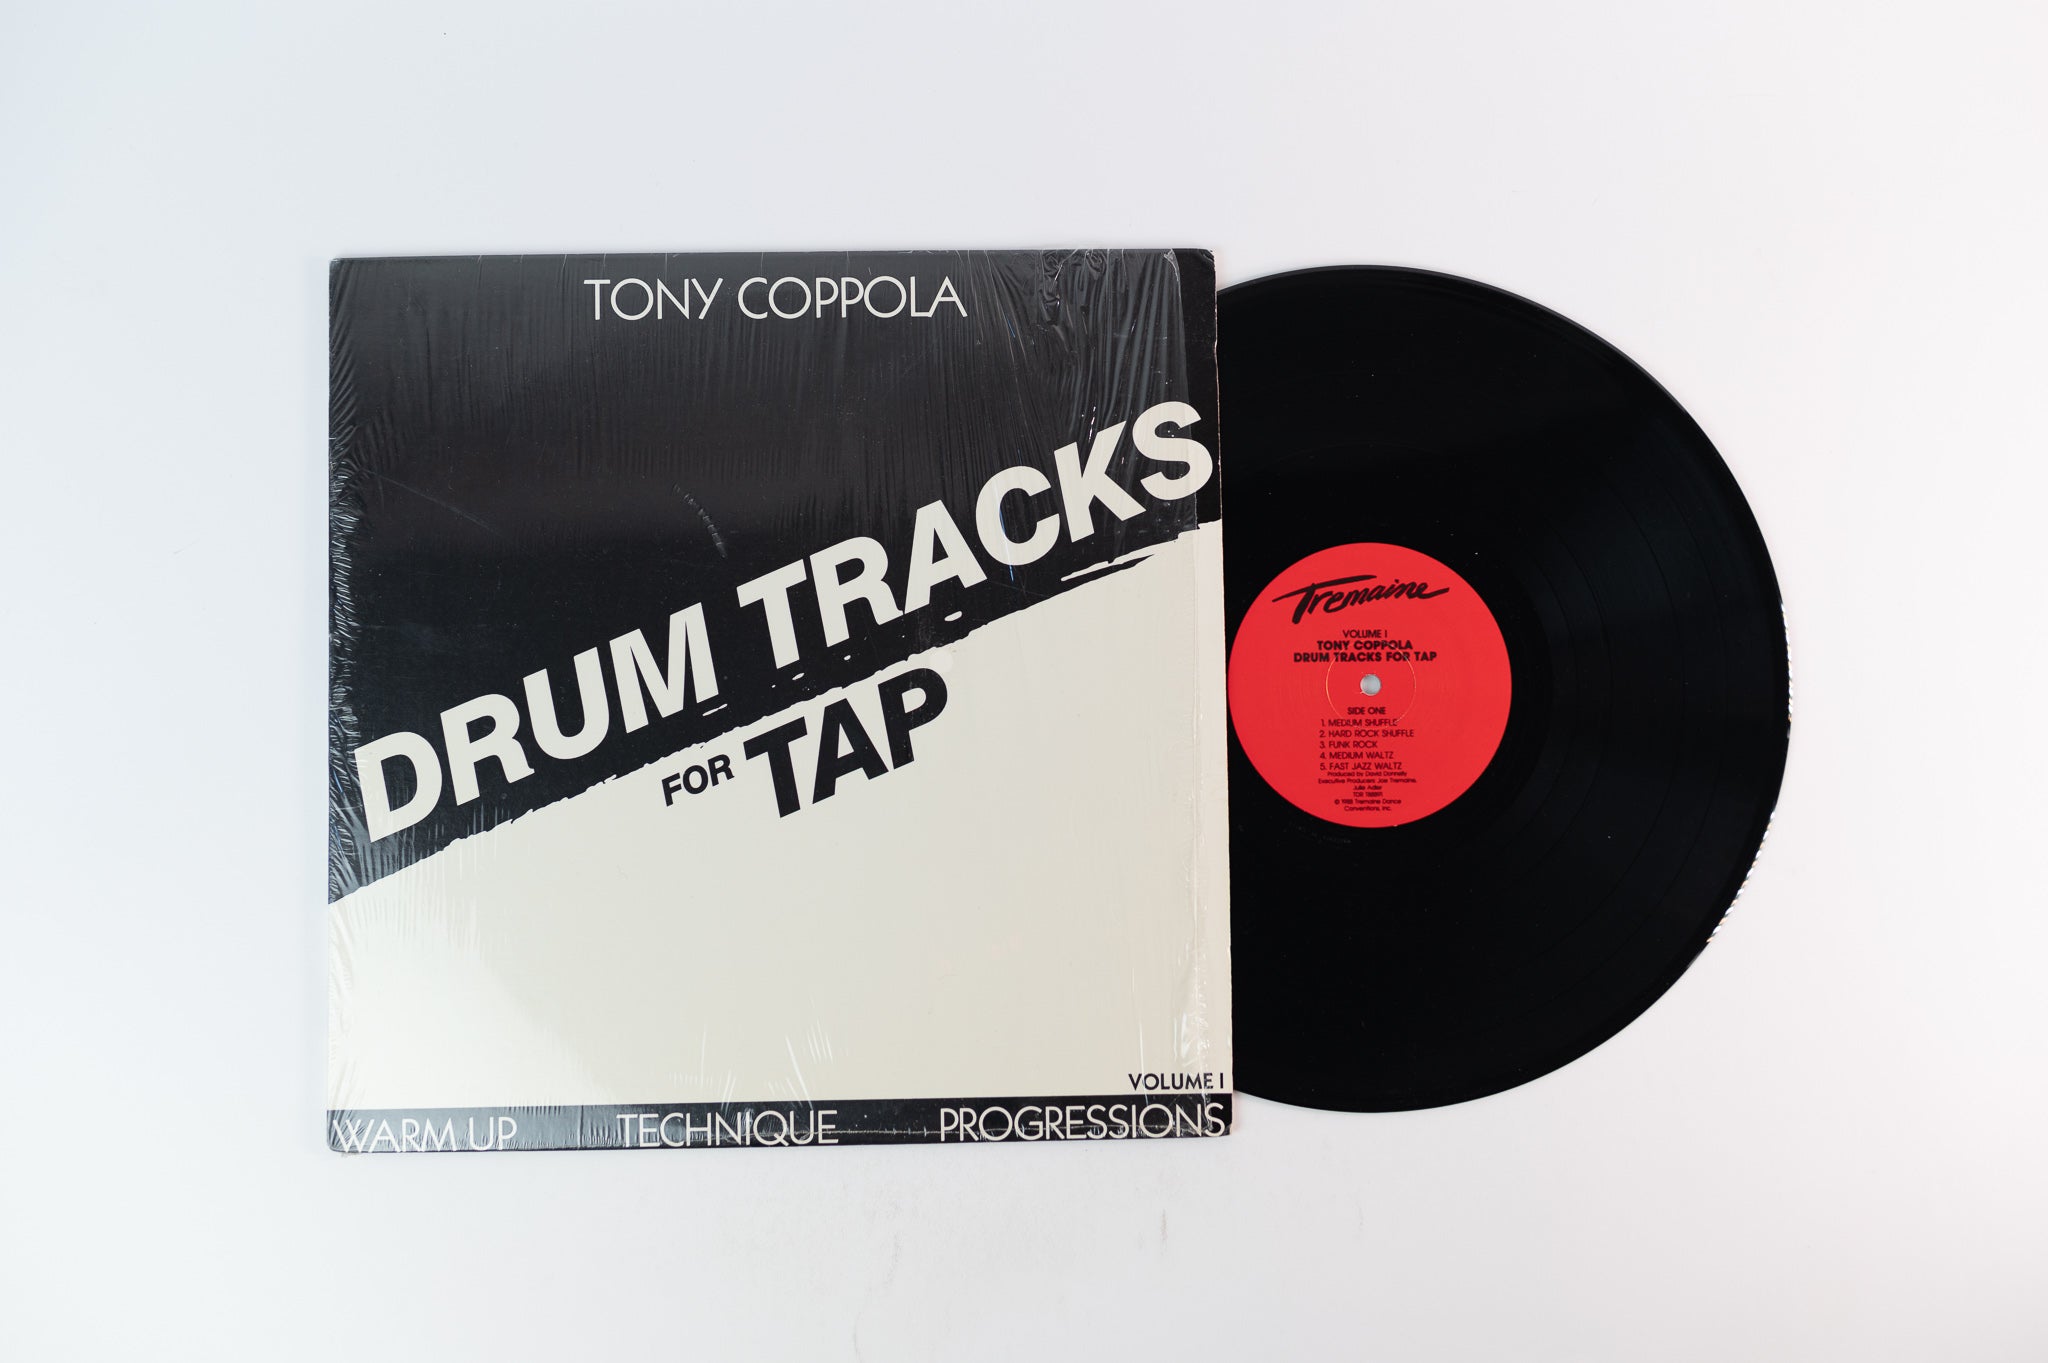 Tony Coppola - Drum Tracks For Tap on Tremaine Dance Conventions